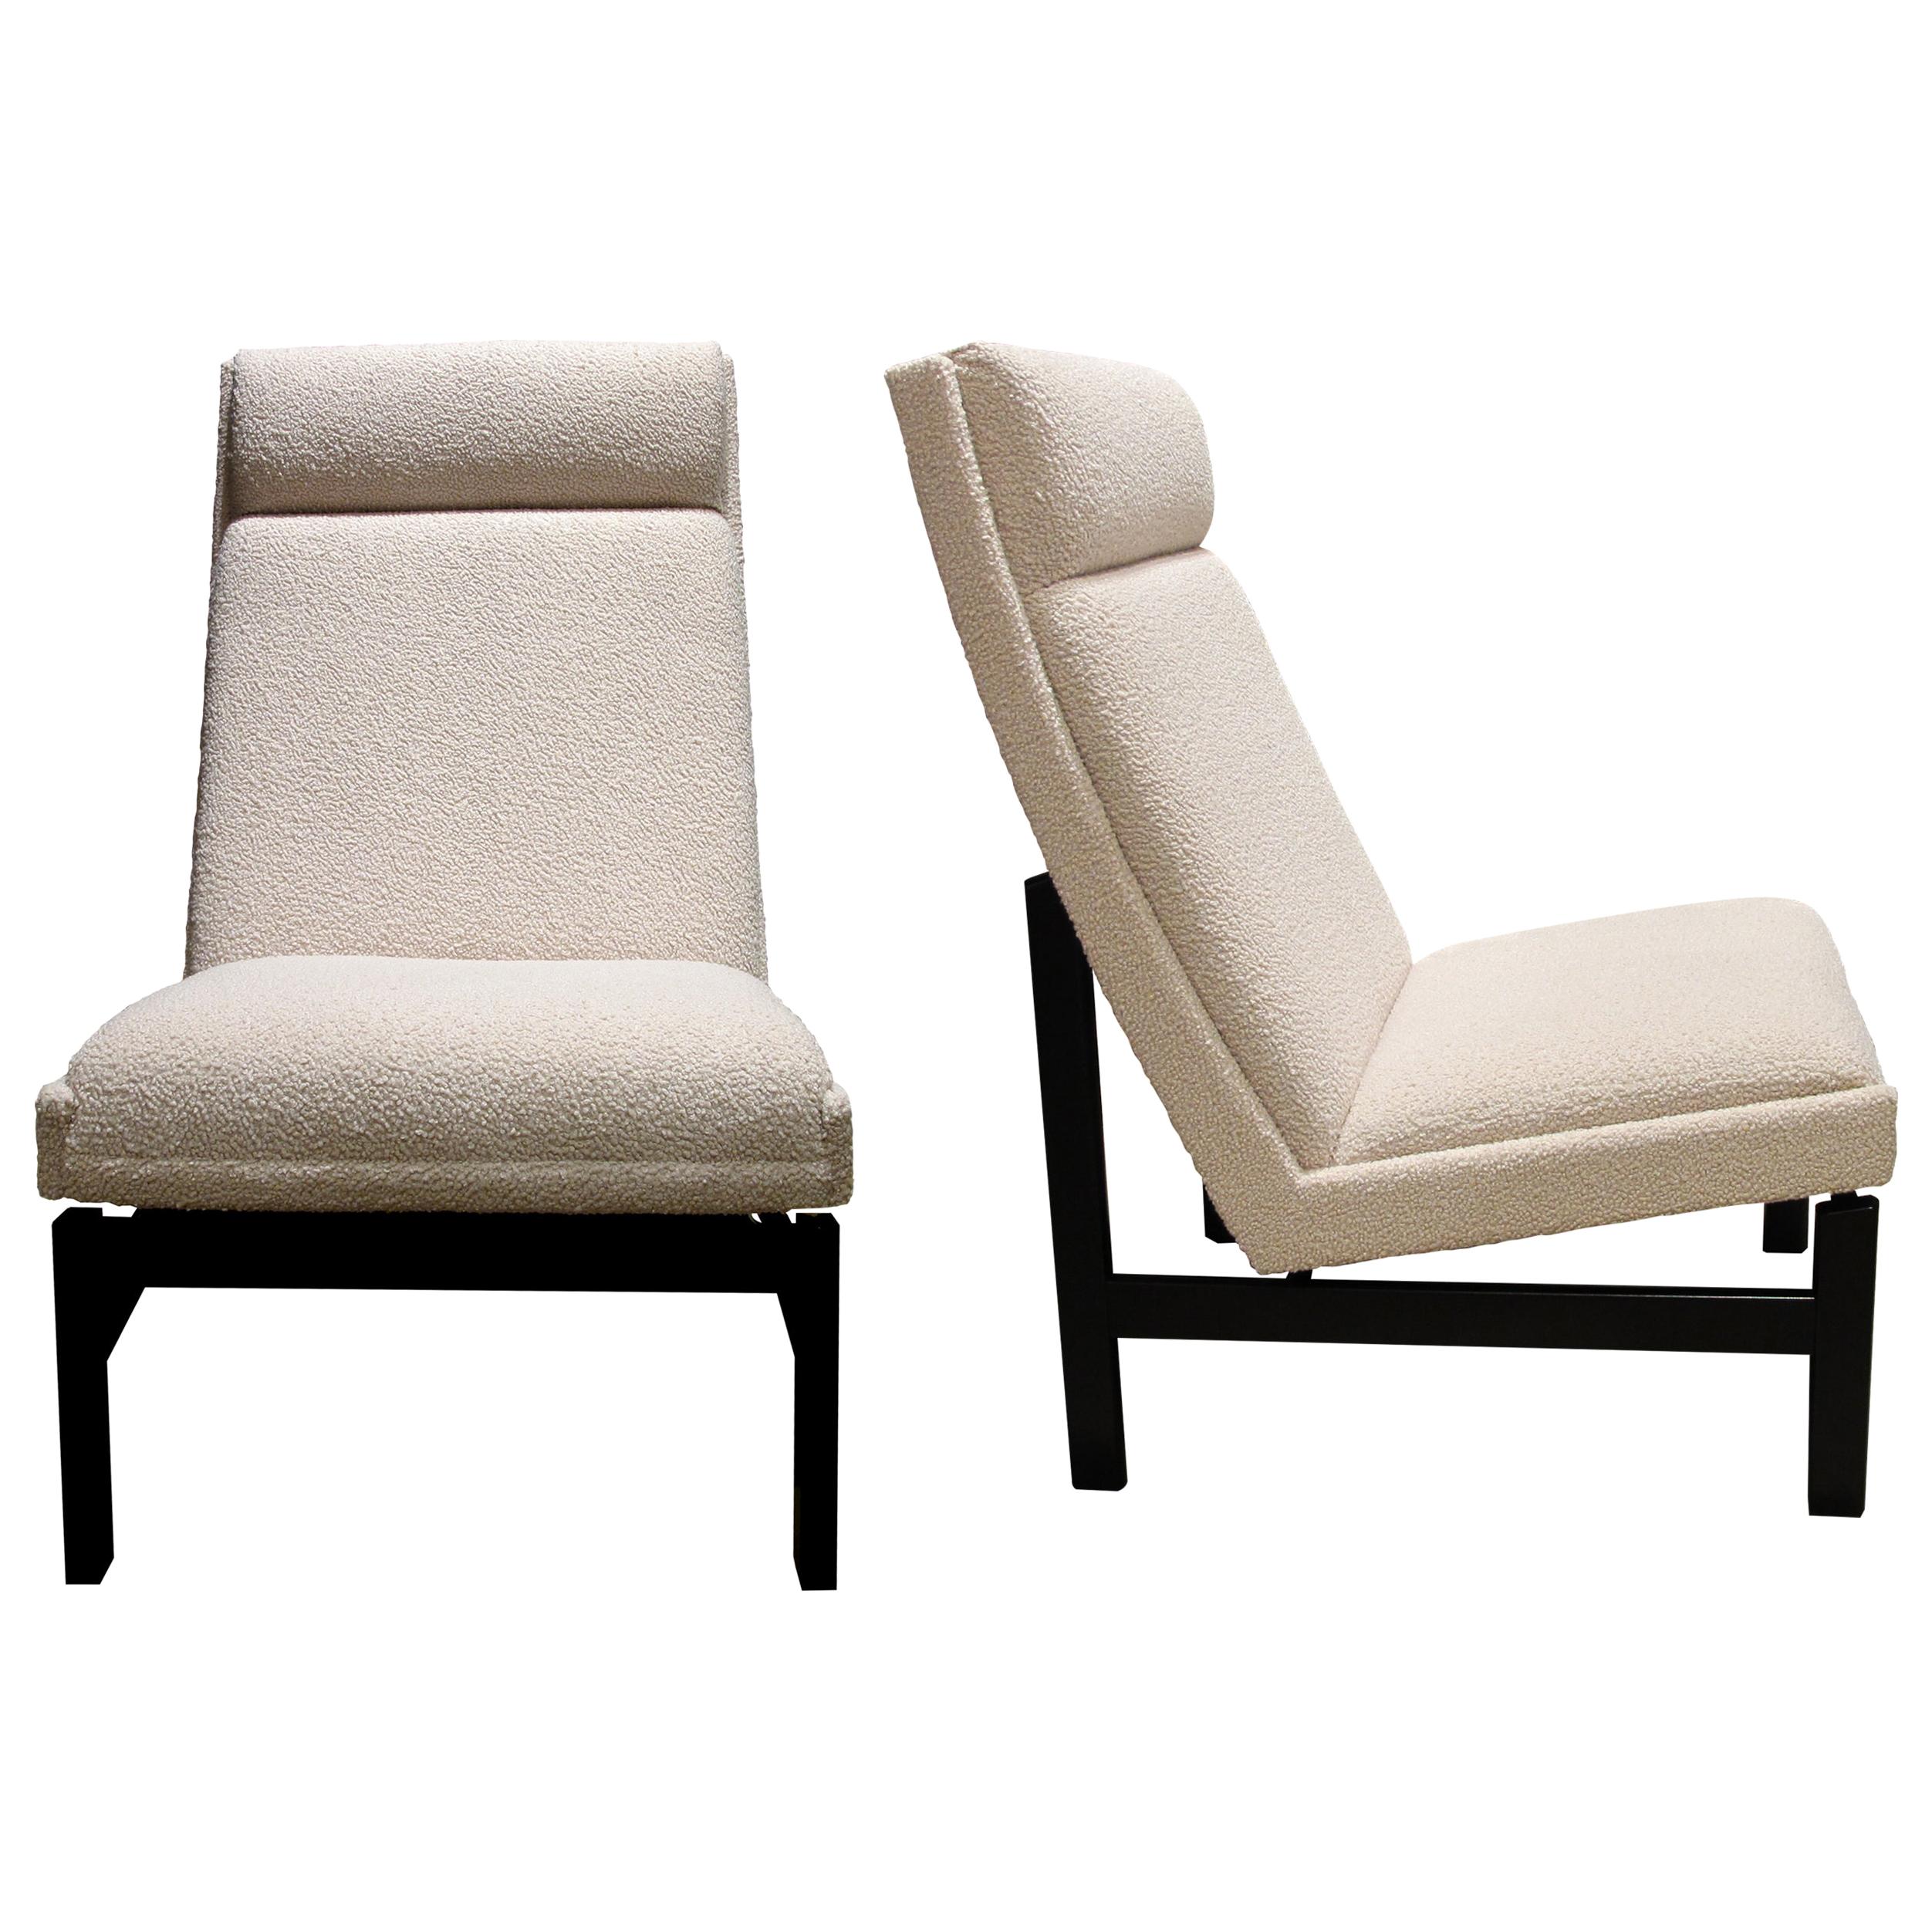 1960s Danish Structural Tall Back Elegant Armchairs in Cream Bouclé Fabric